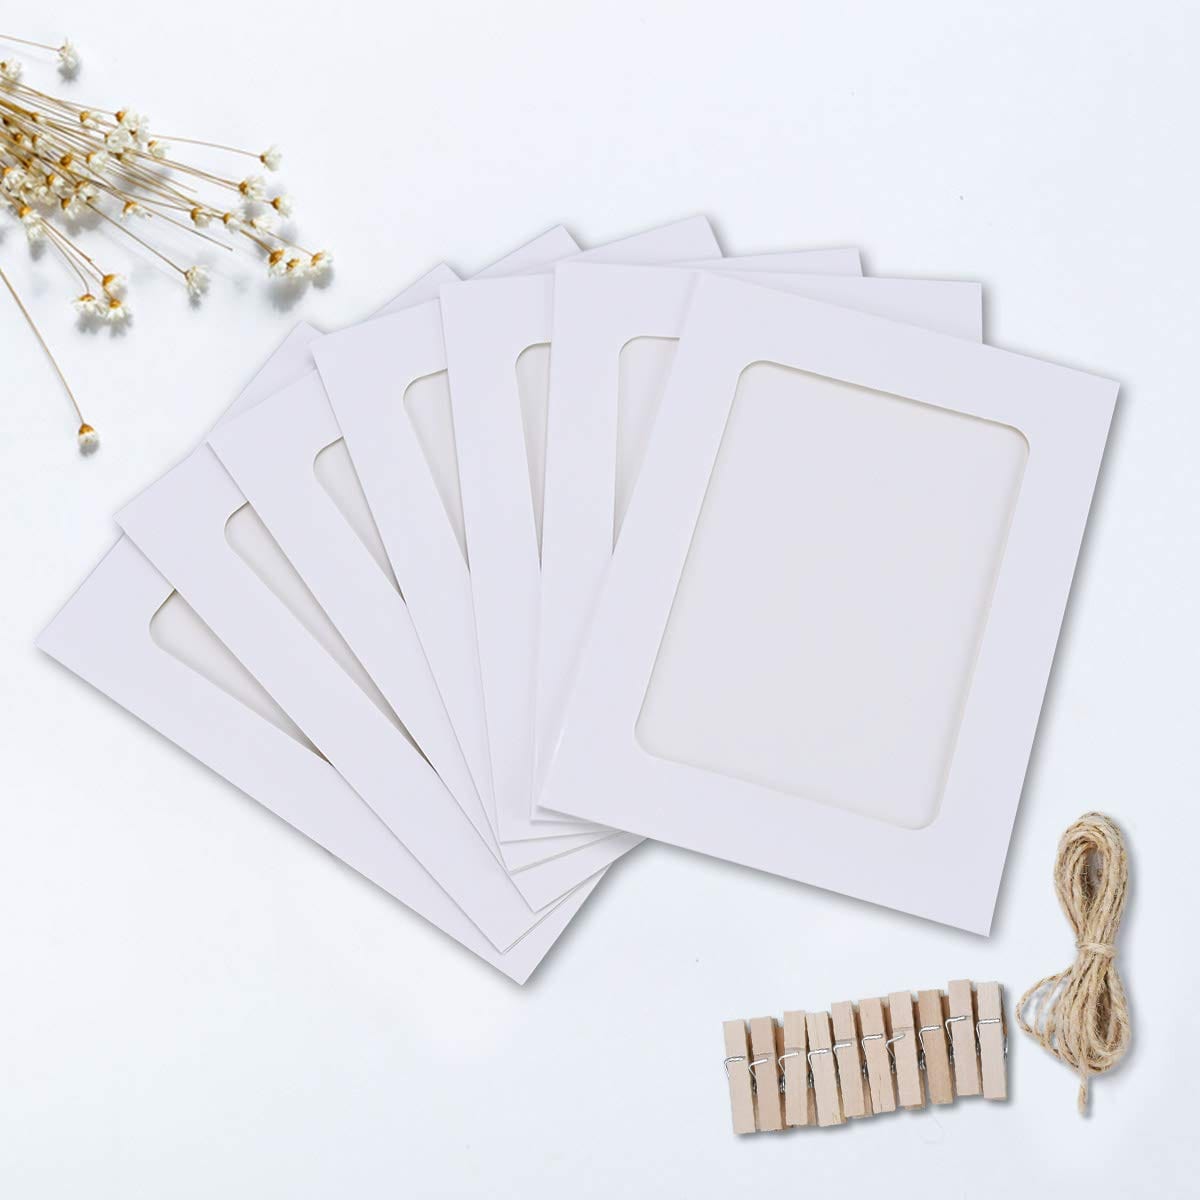 Inkarto Get Creative with DIY Kraft Paper Photo Frames - 10 PCS Set with Clips and Twine (white)